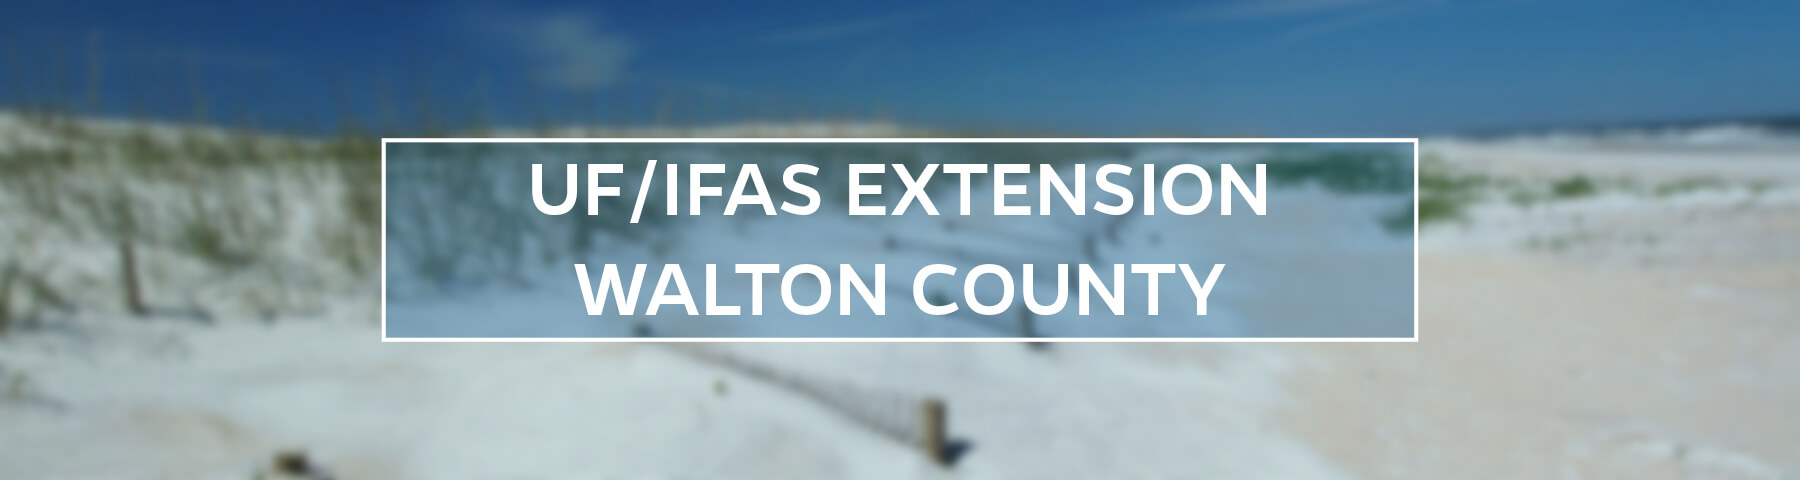 UF/IFAS Extension Walton County